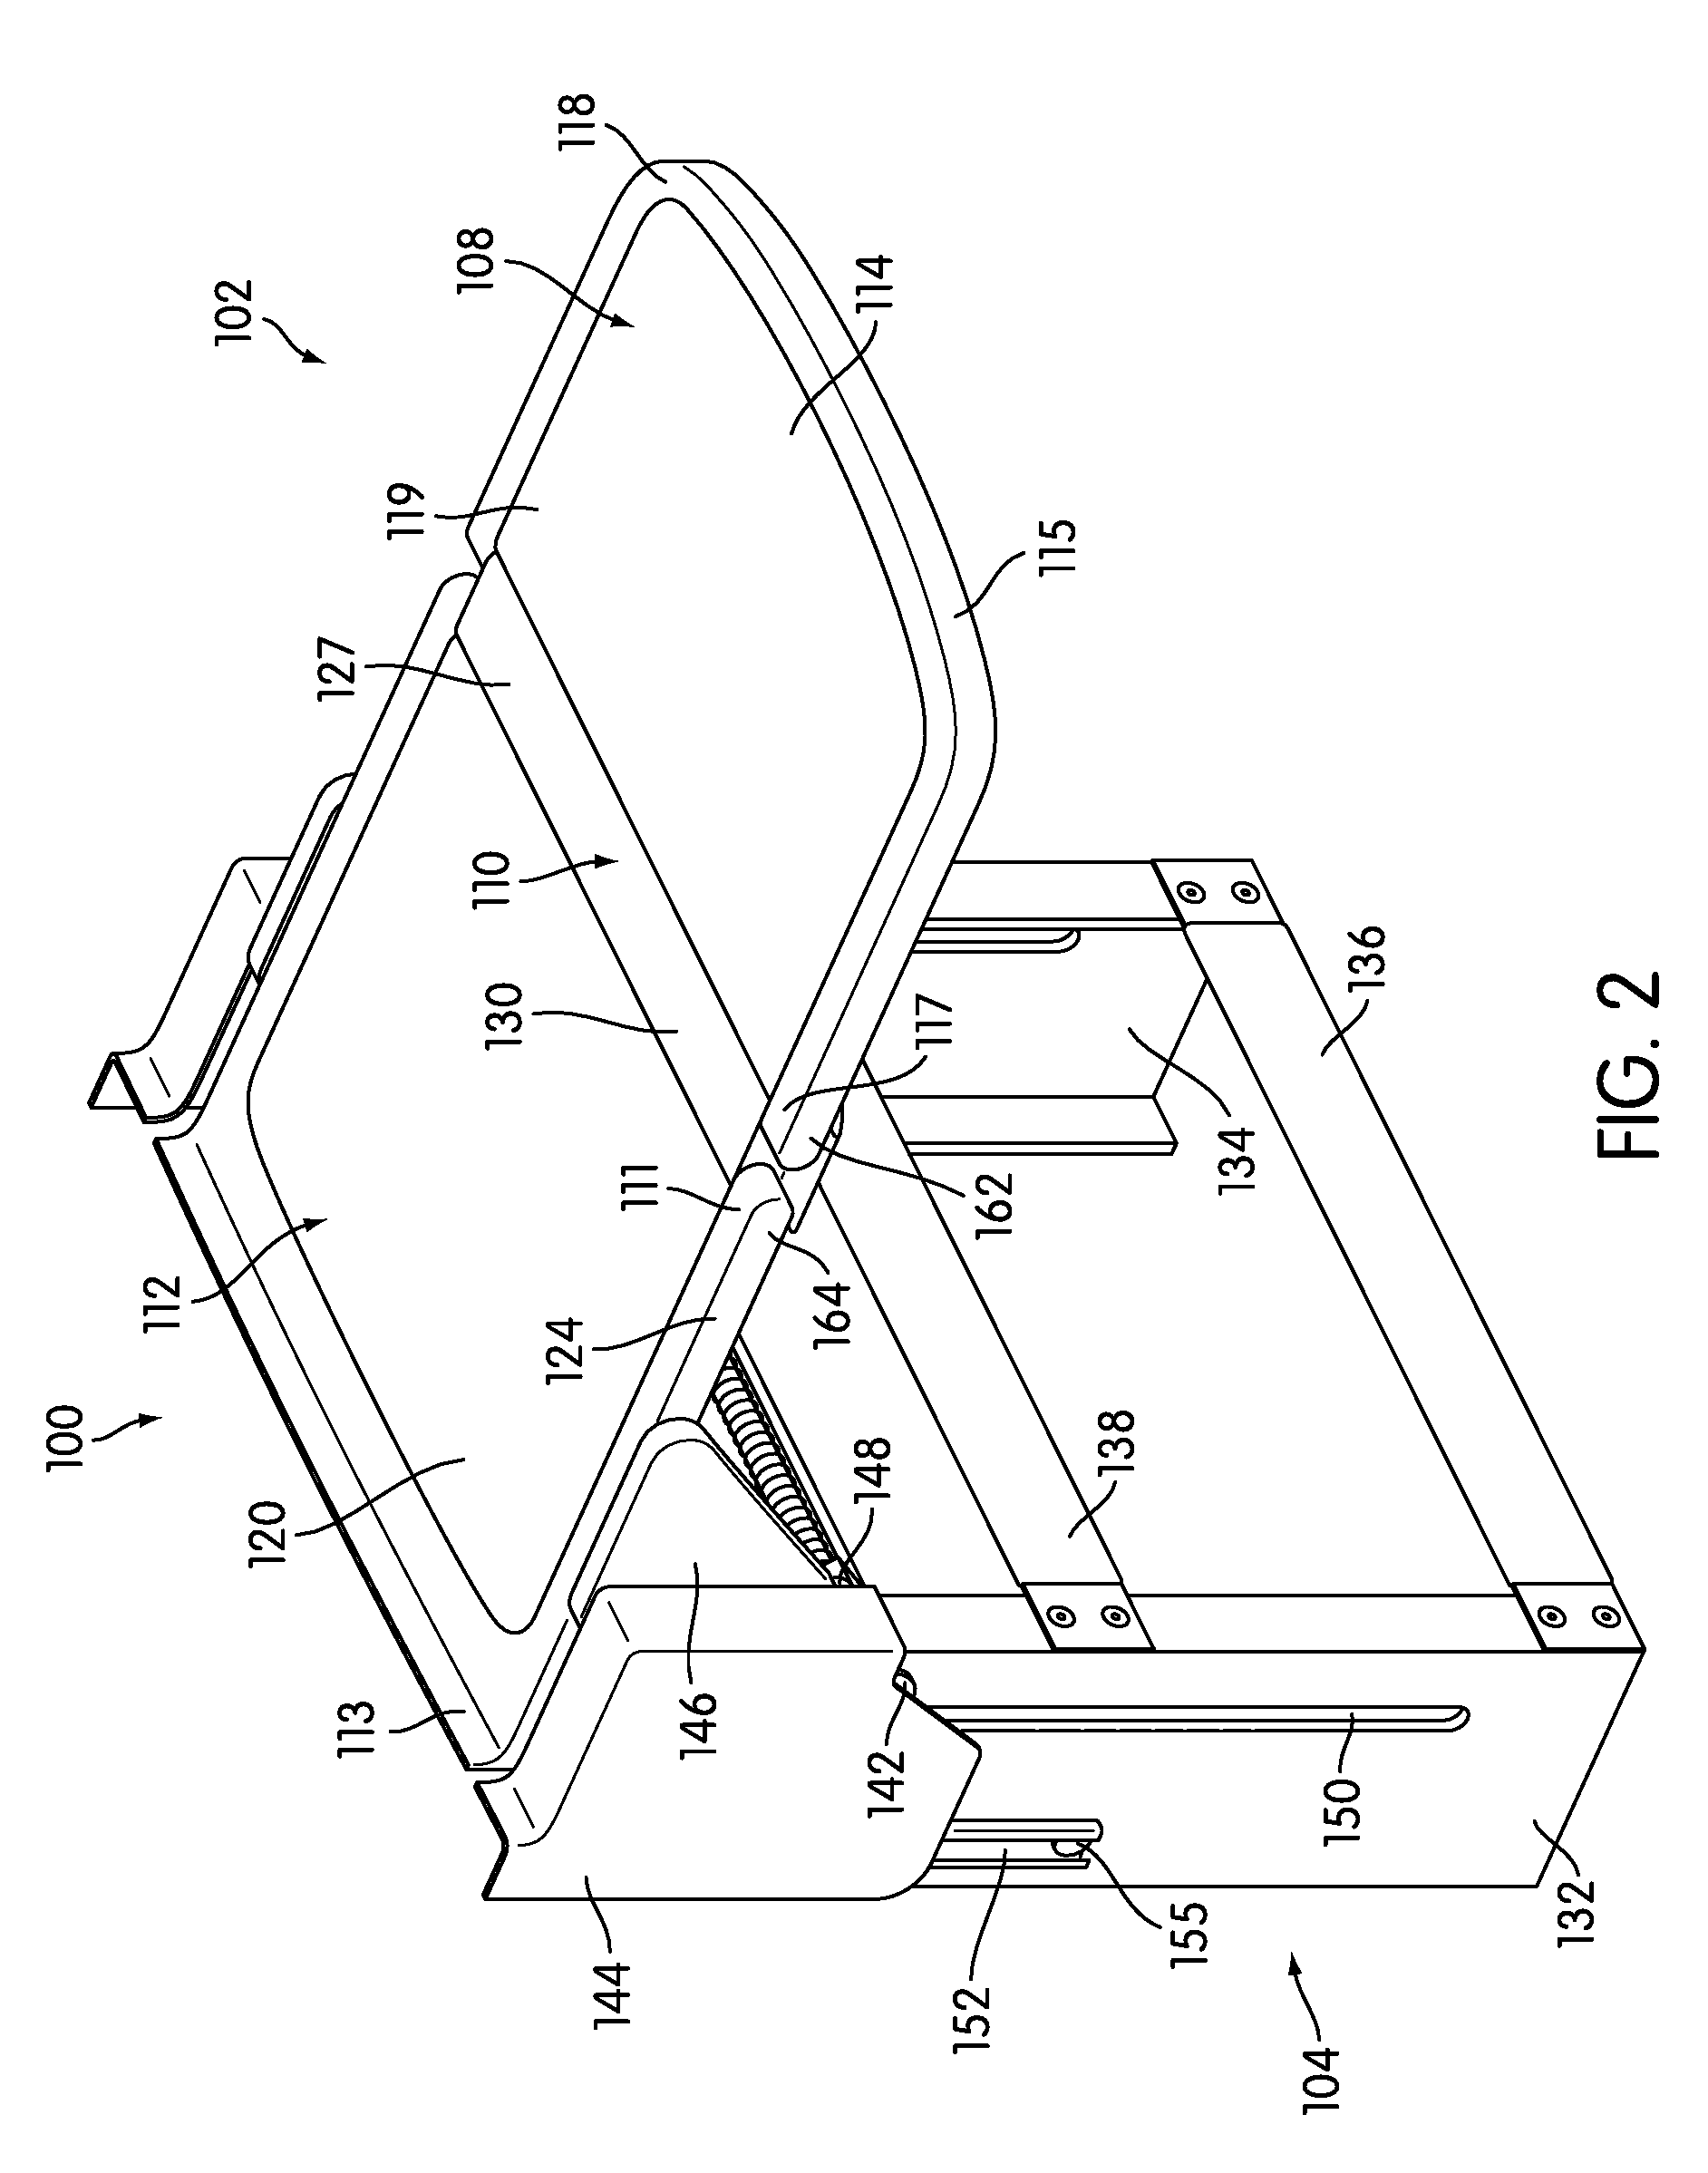 Folding Table and Support Frame Assembly